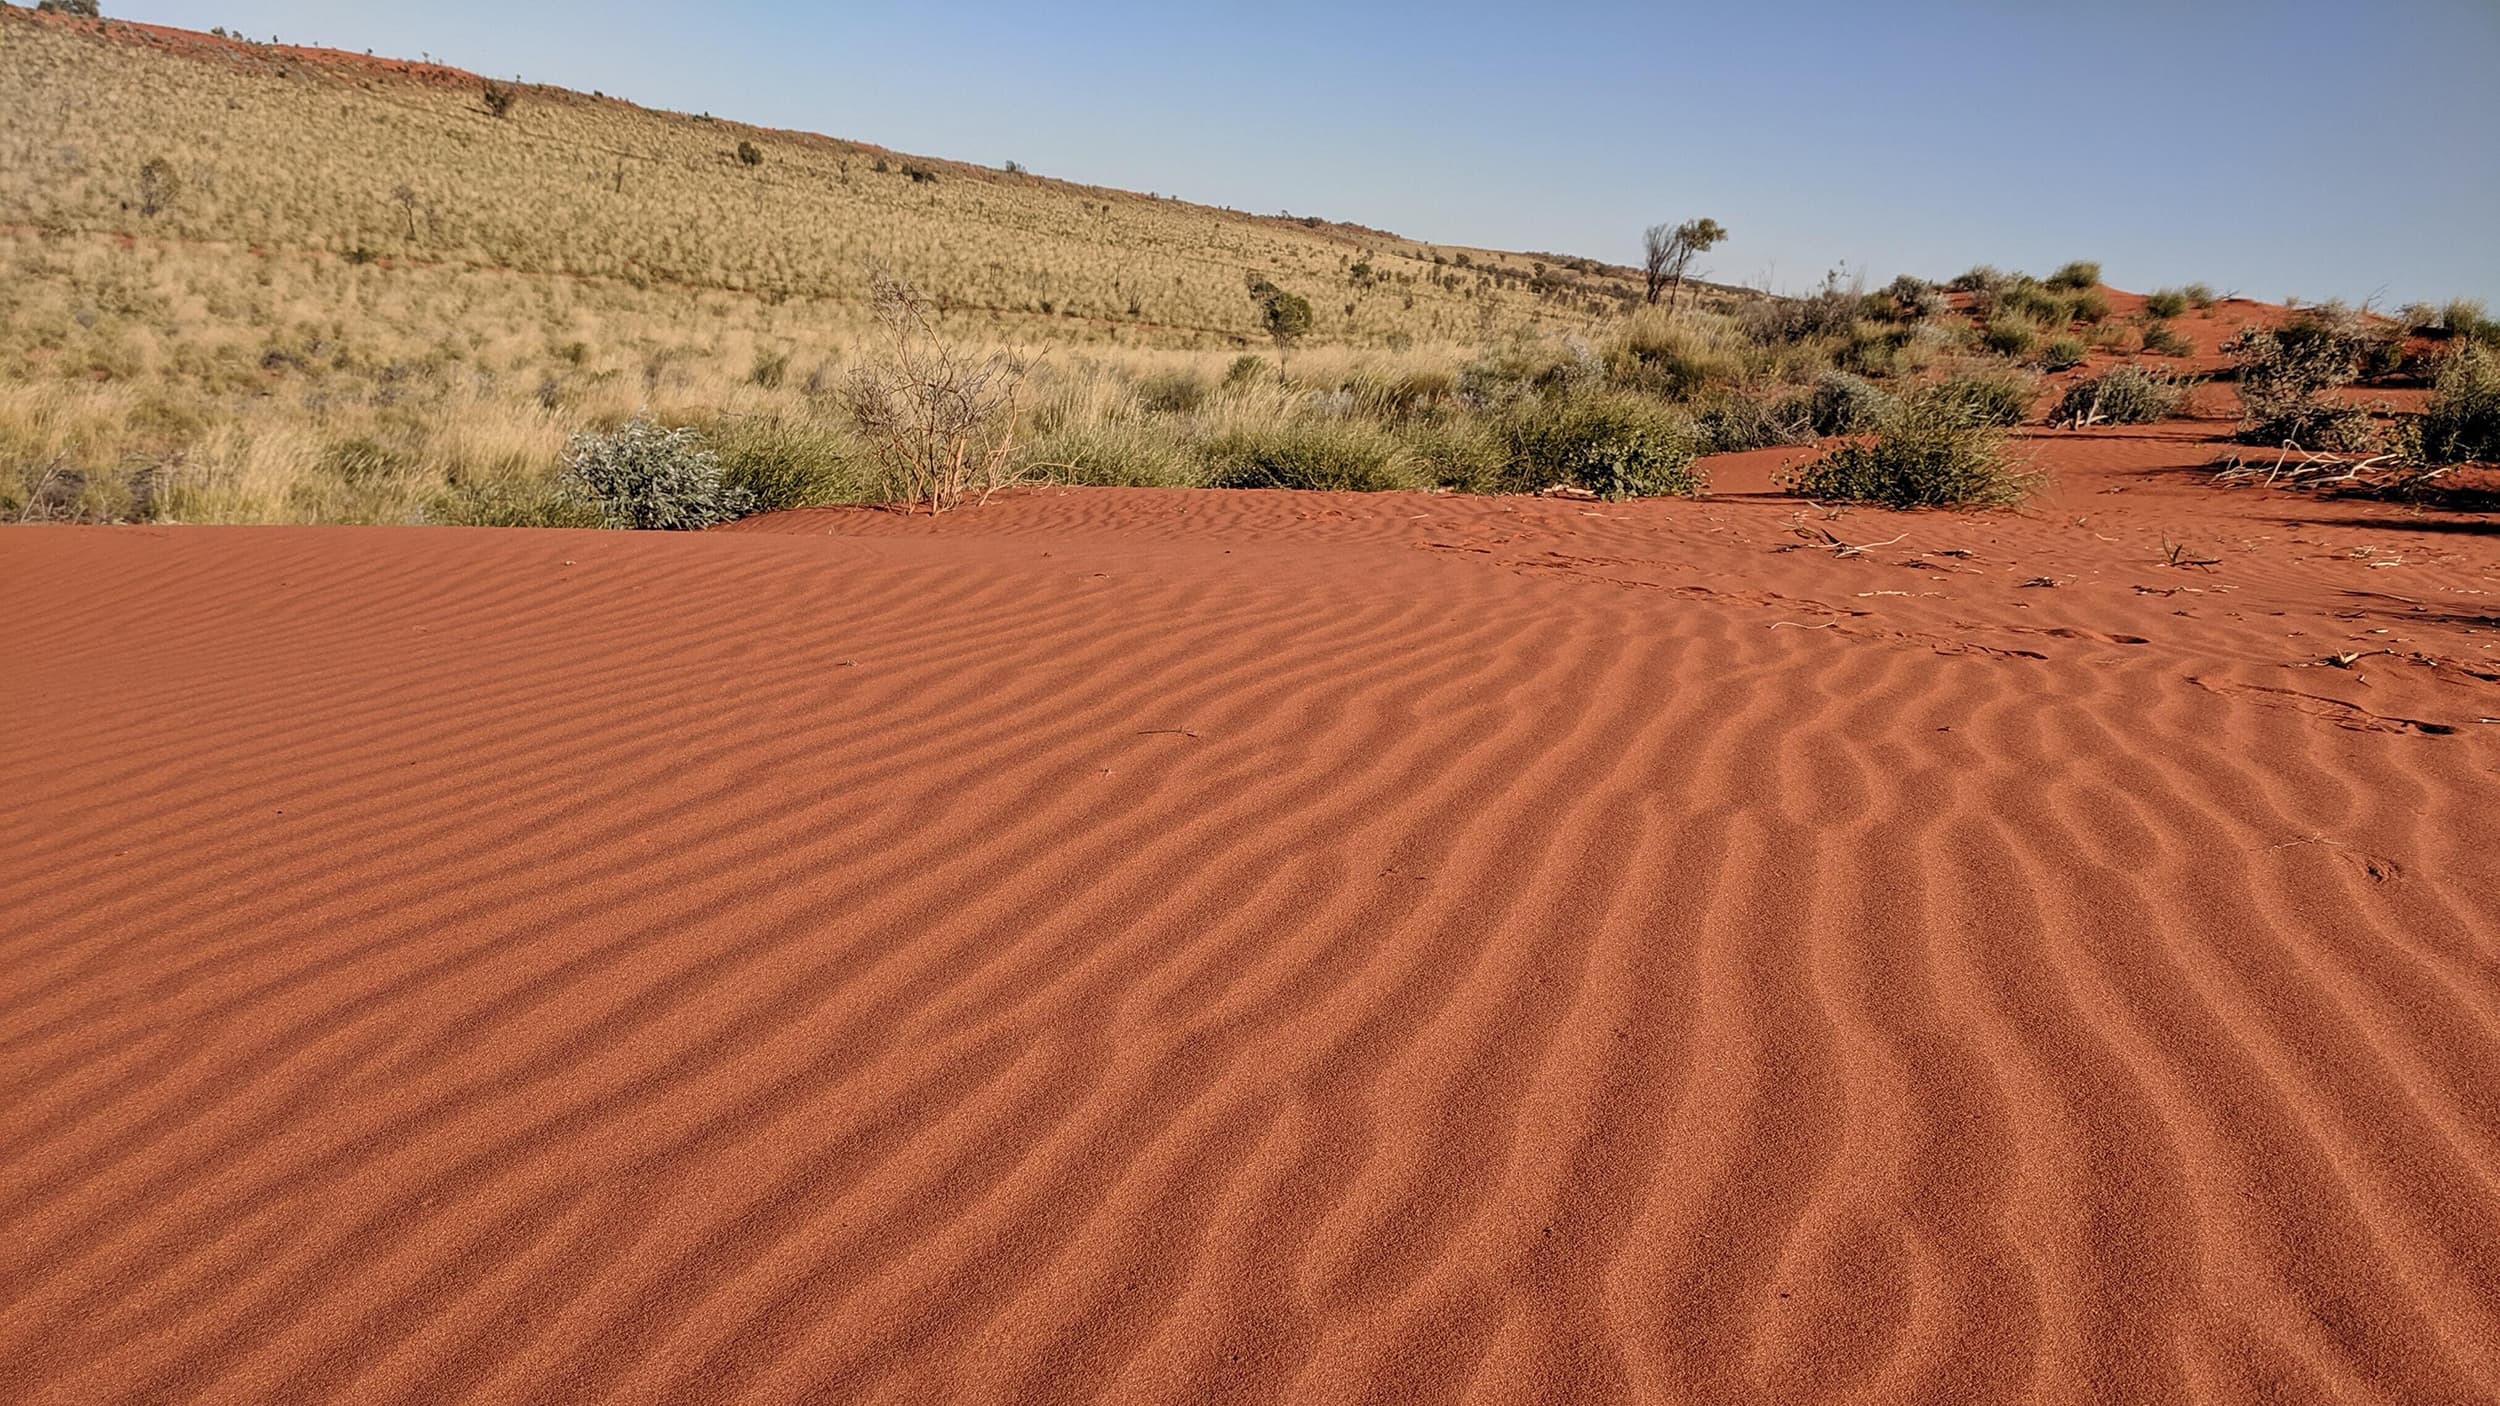 Low view of Australian Outback landscape with red dirt texture heavily feature and dry grassy hill in the distant background